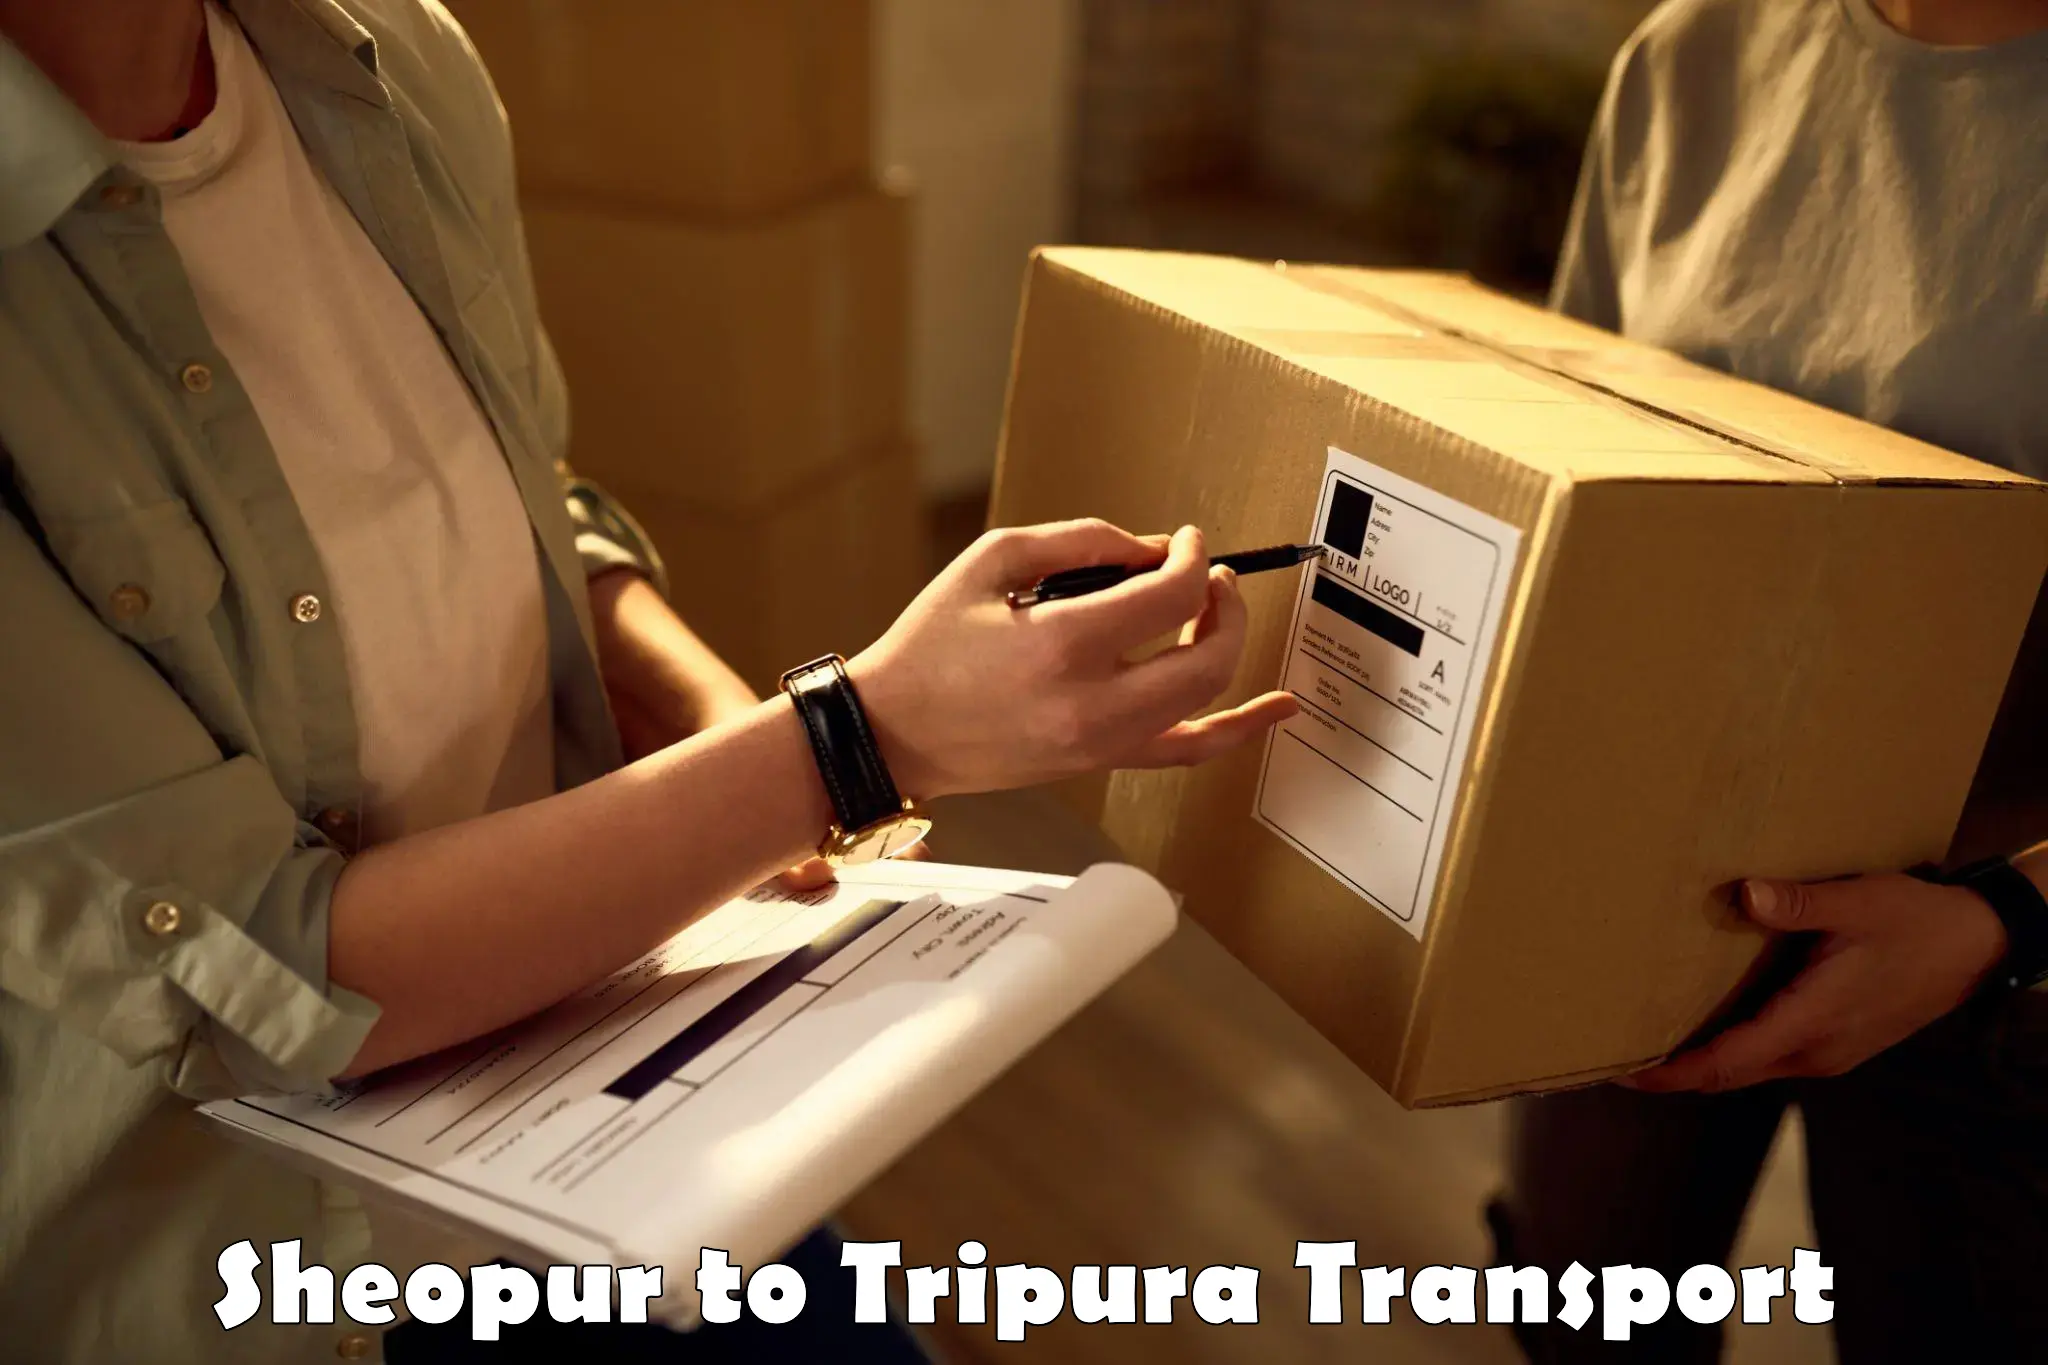 Domestic transport services Sheopur to Udaipur Tripura